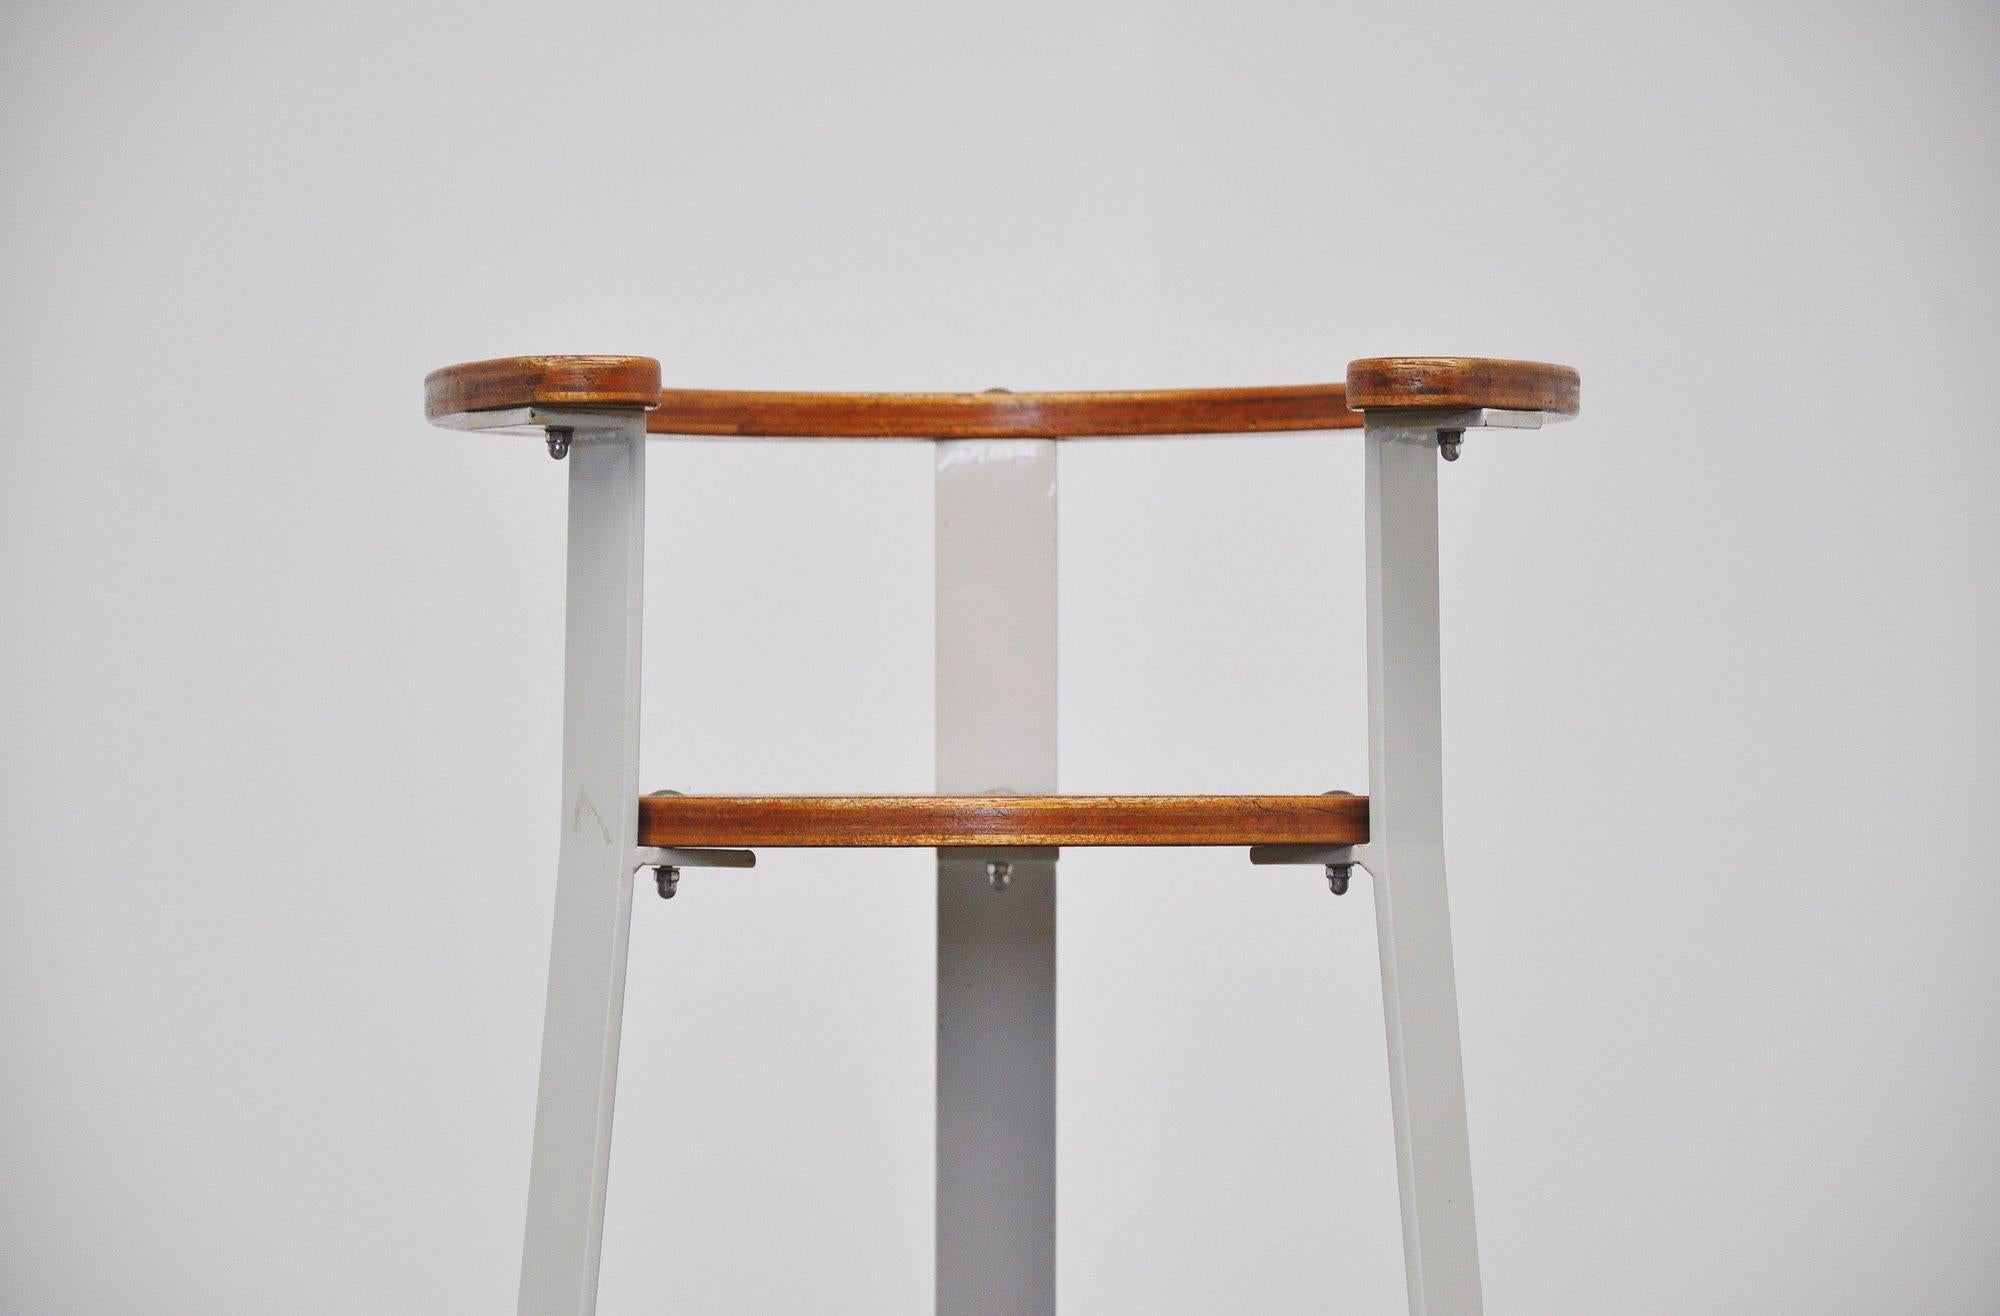 Super elegant high children's chair designed by Dutch architect Gunnar Daan, Holland, 1966. This chair was designed by Gunnar Daan and made for their own children. Later on this was taken in production by Metz & Co. This is for a rare prototype to